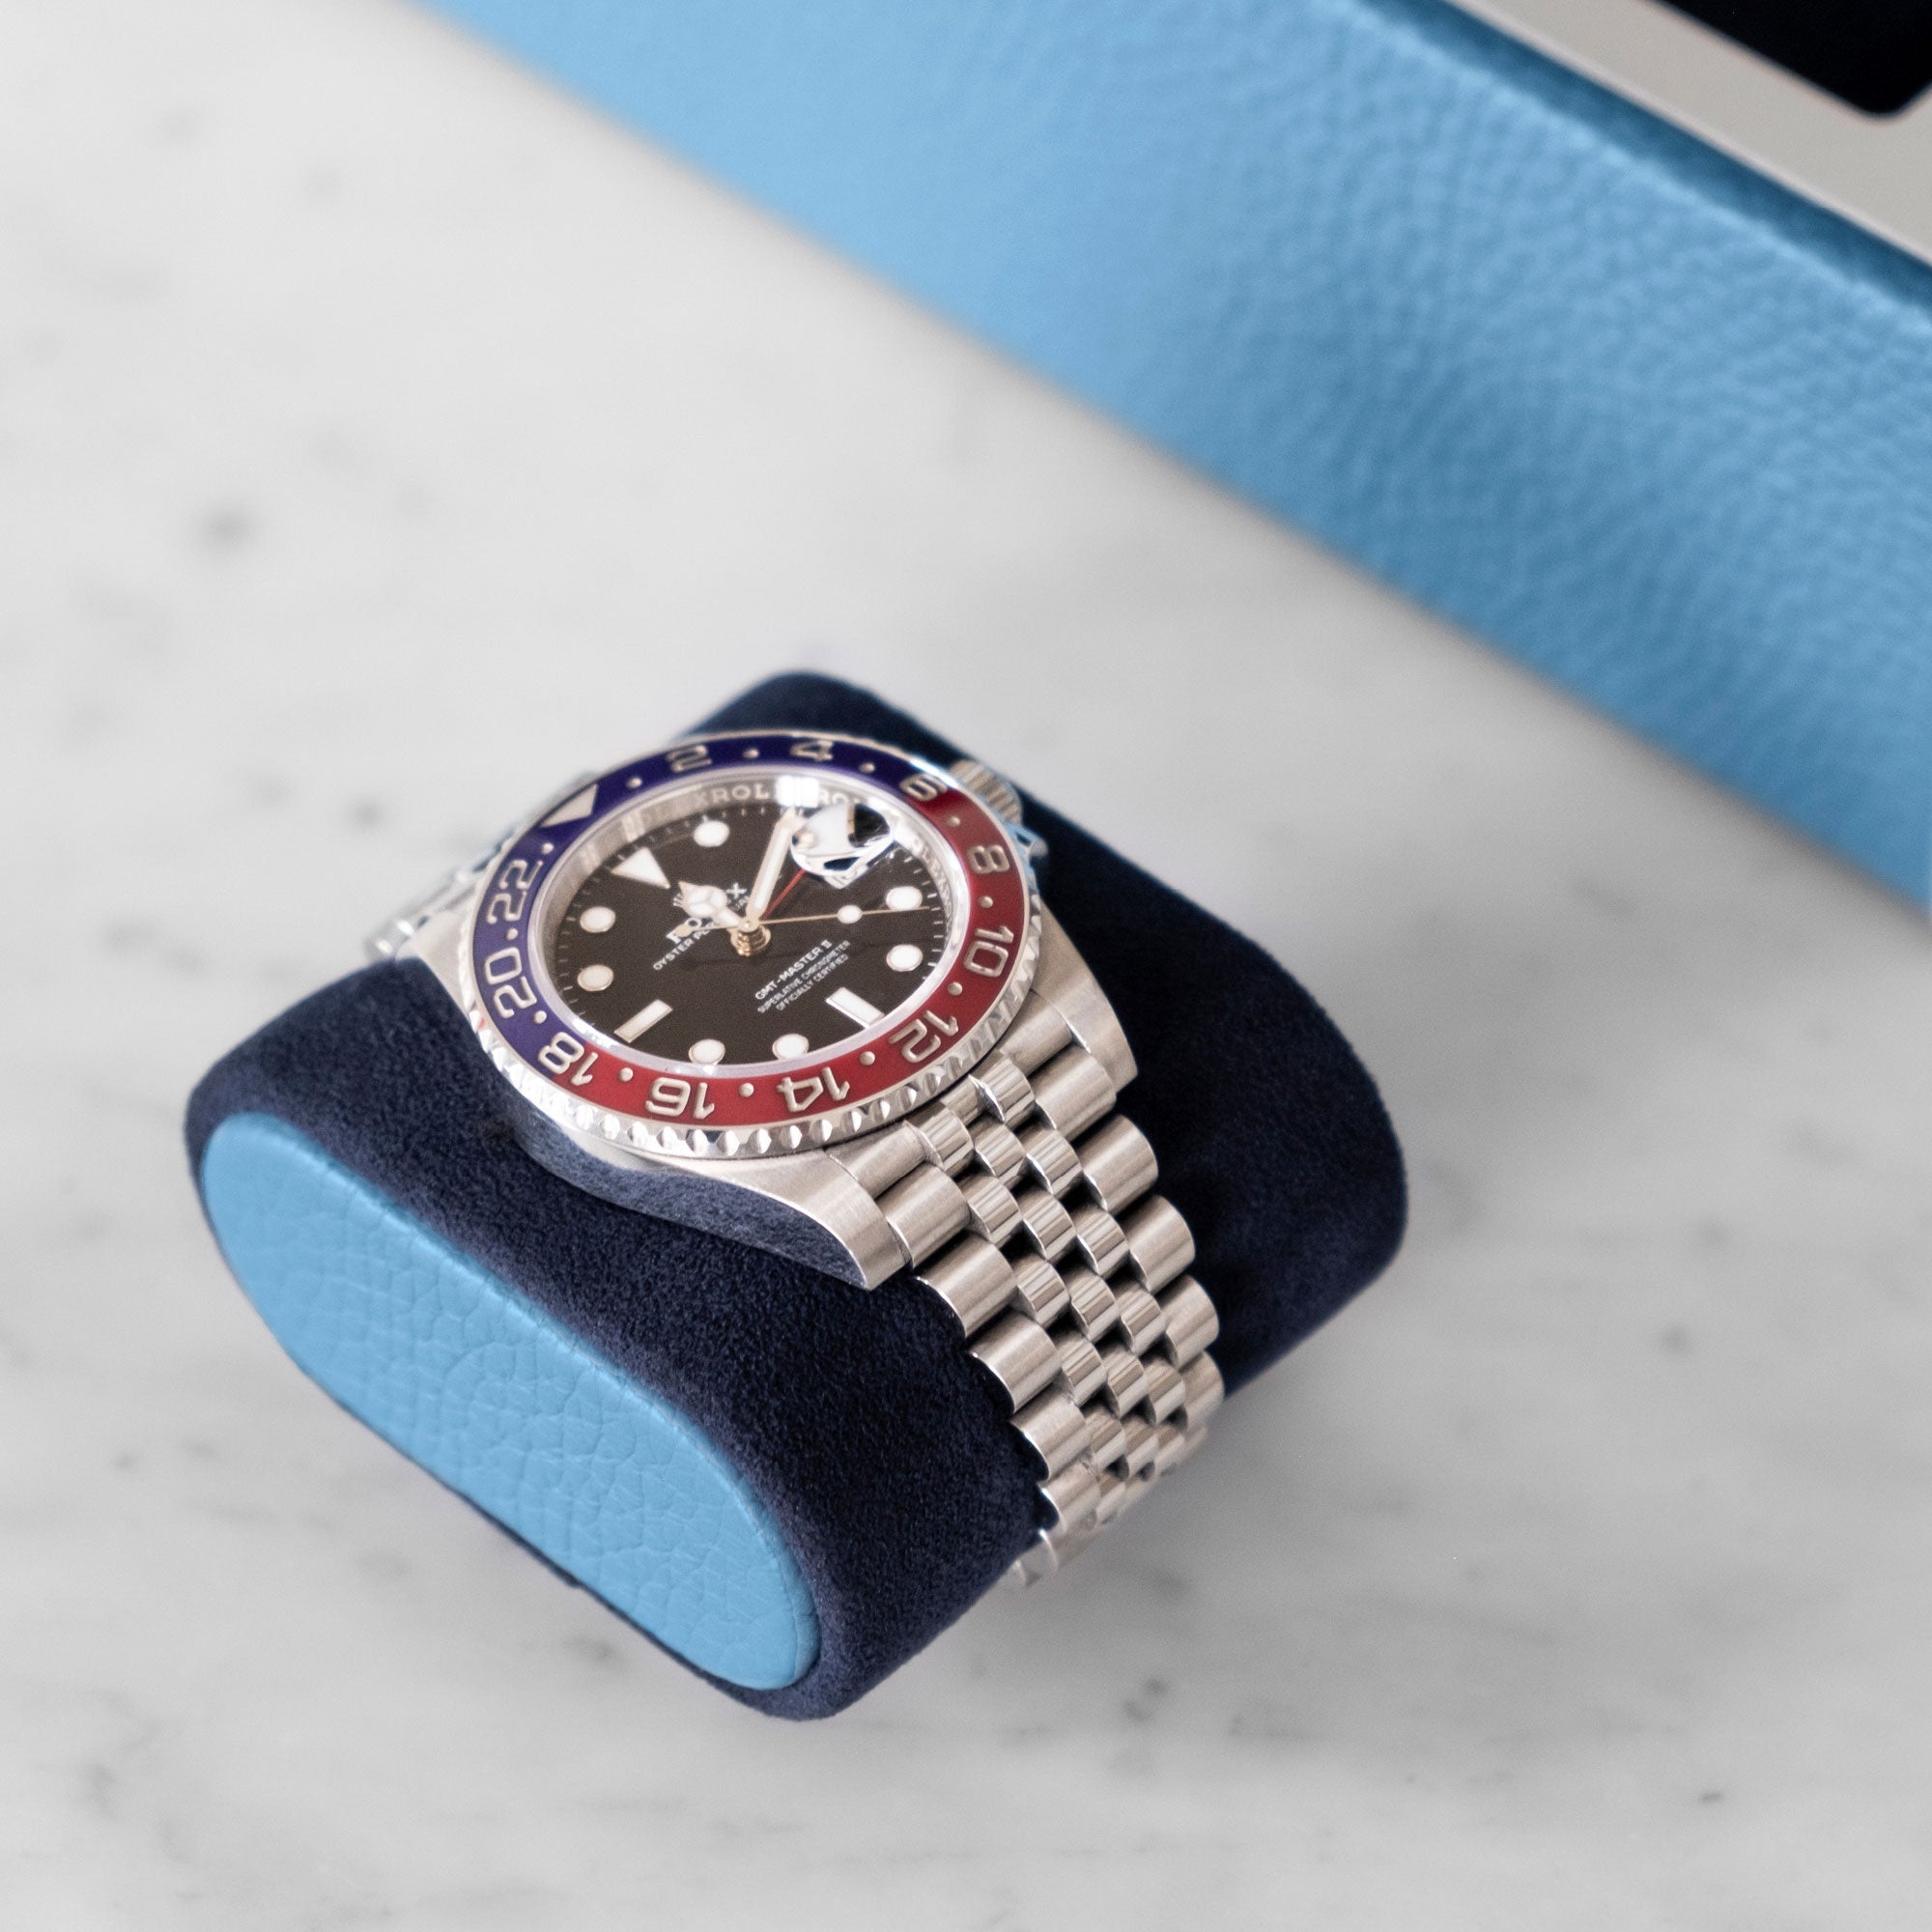 Removable Alcantara watch cushion with sky blue leather side accents with Rolex watch